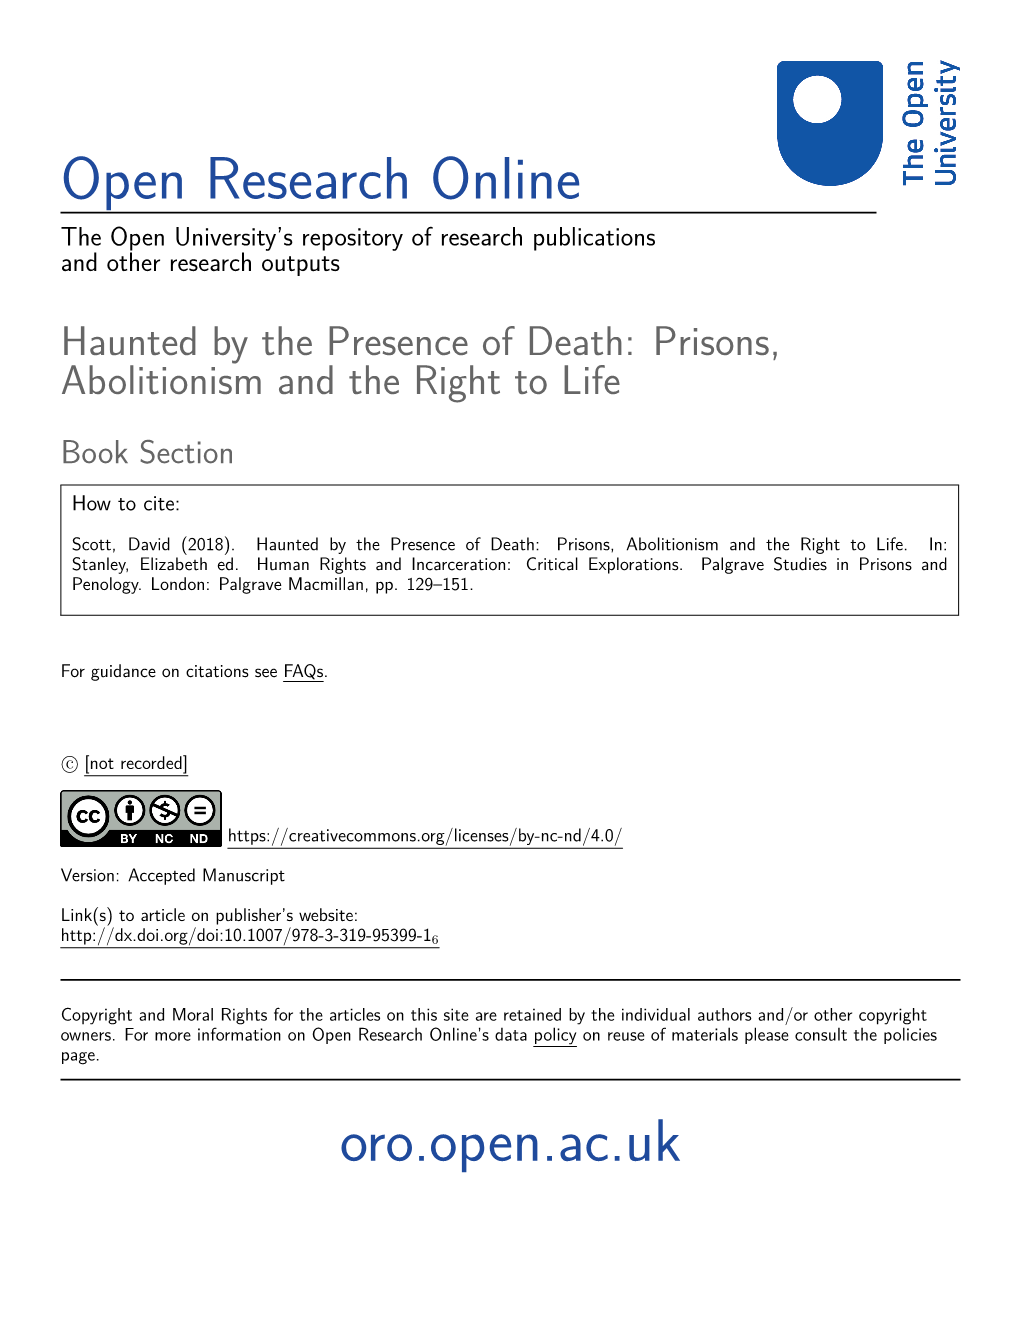 Haunted by the Presence of Death: Prisons, Abolitionism and the Right to Life